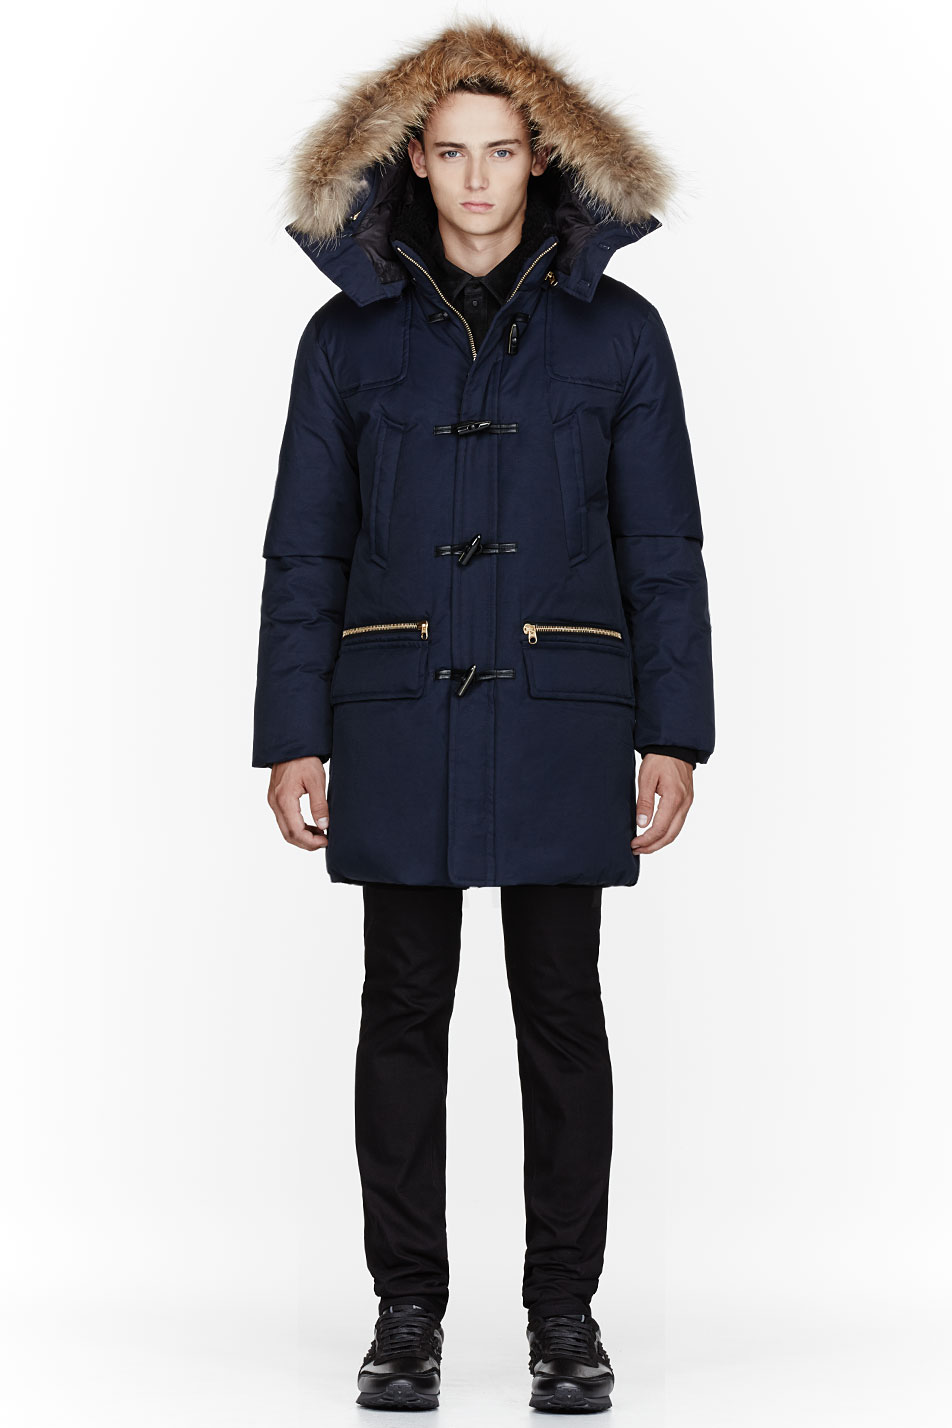 Lyst - Mackage Navy Fur and Down Etienne Parka in Blue for Men